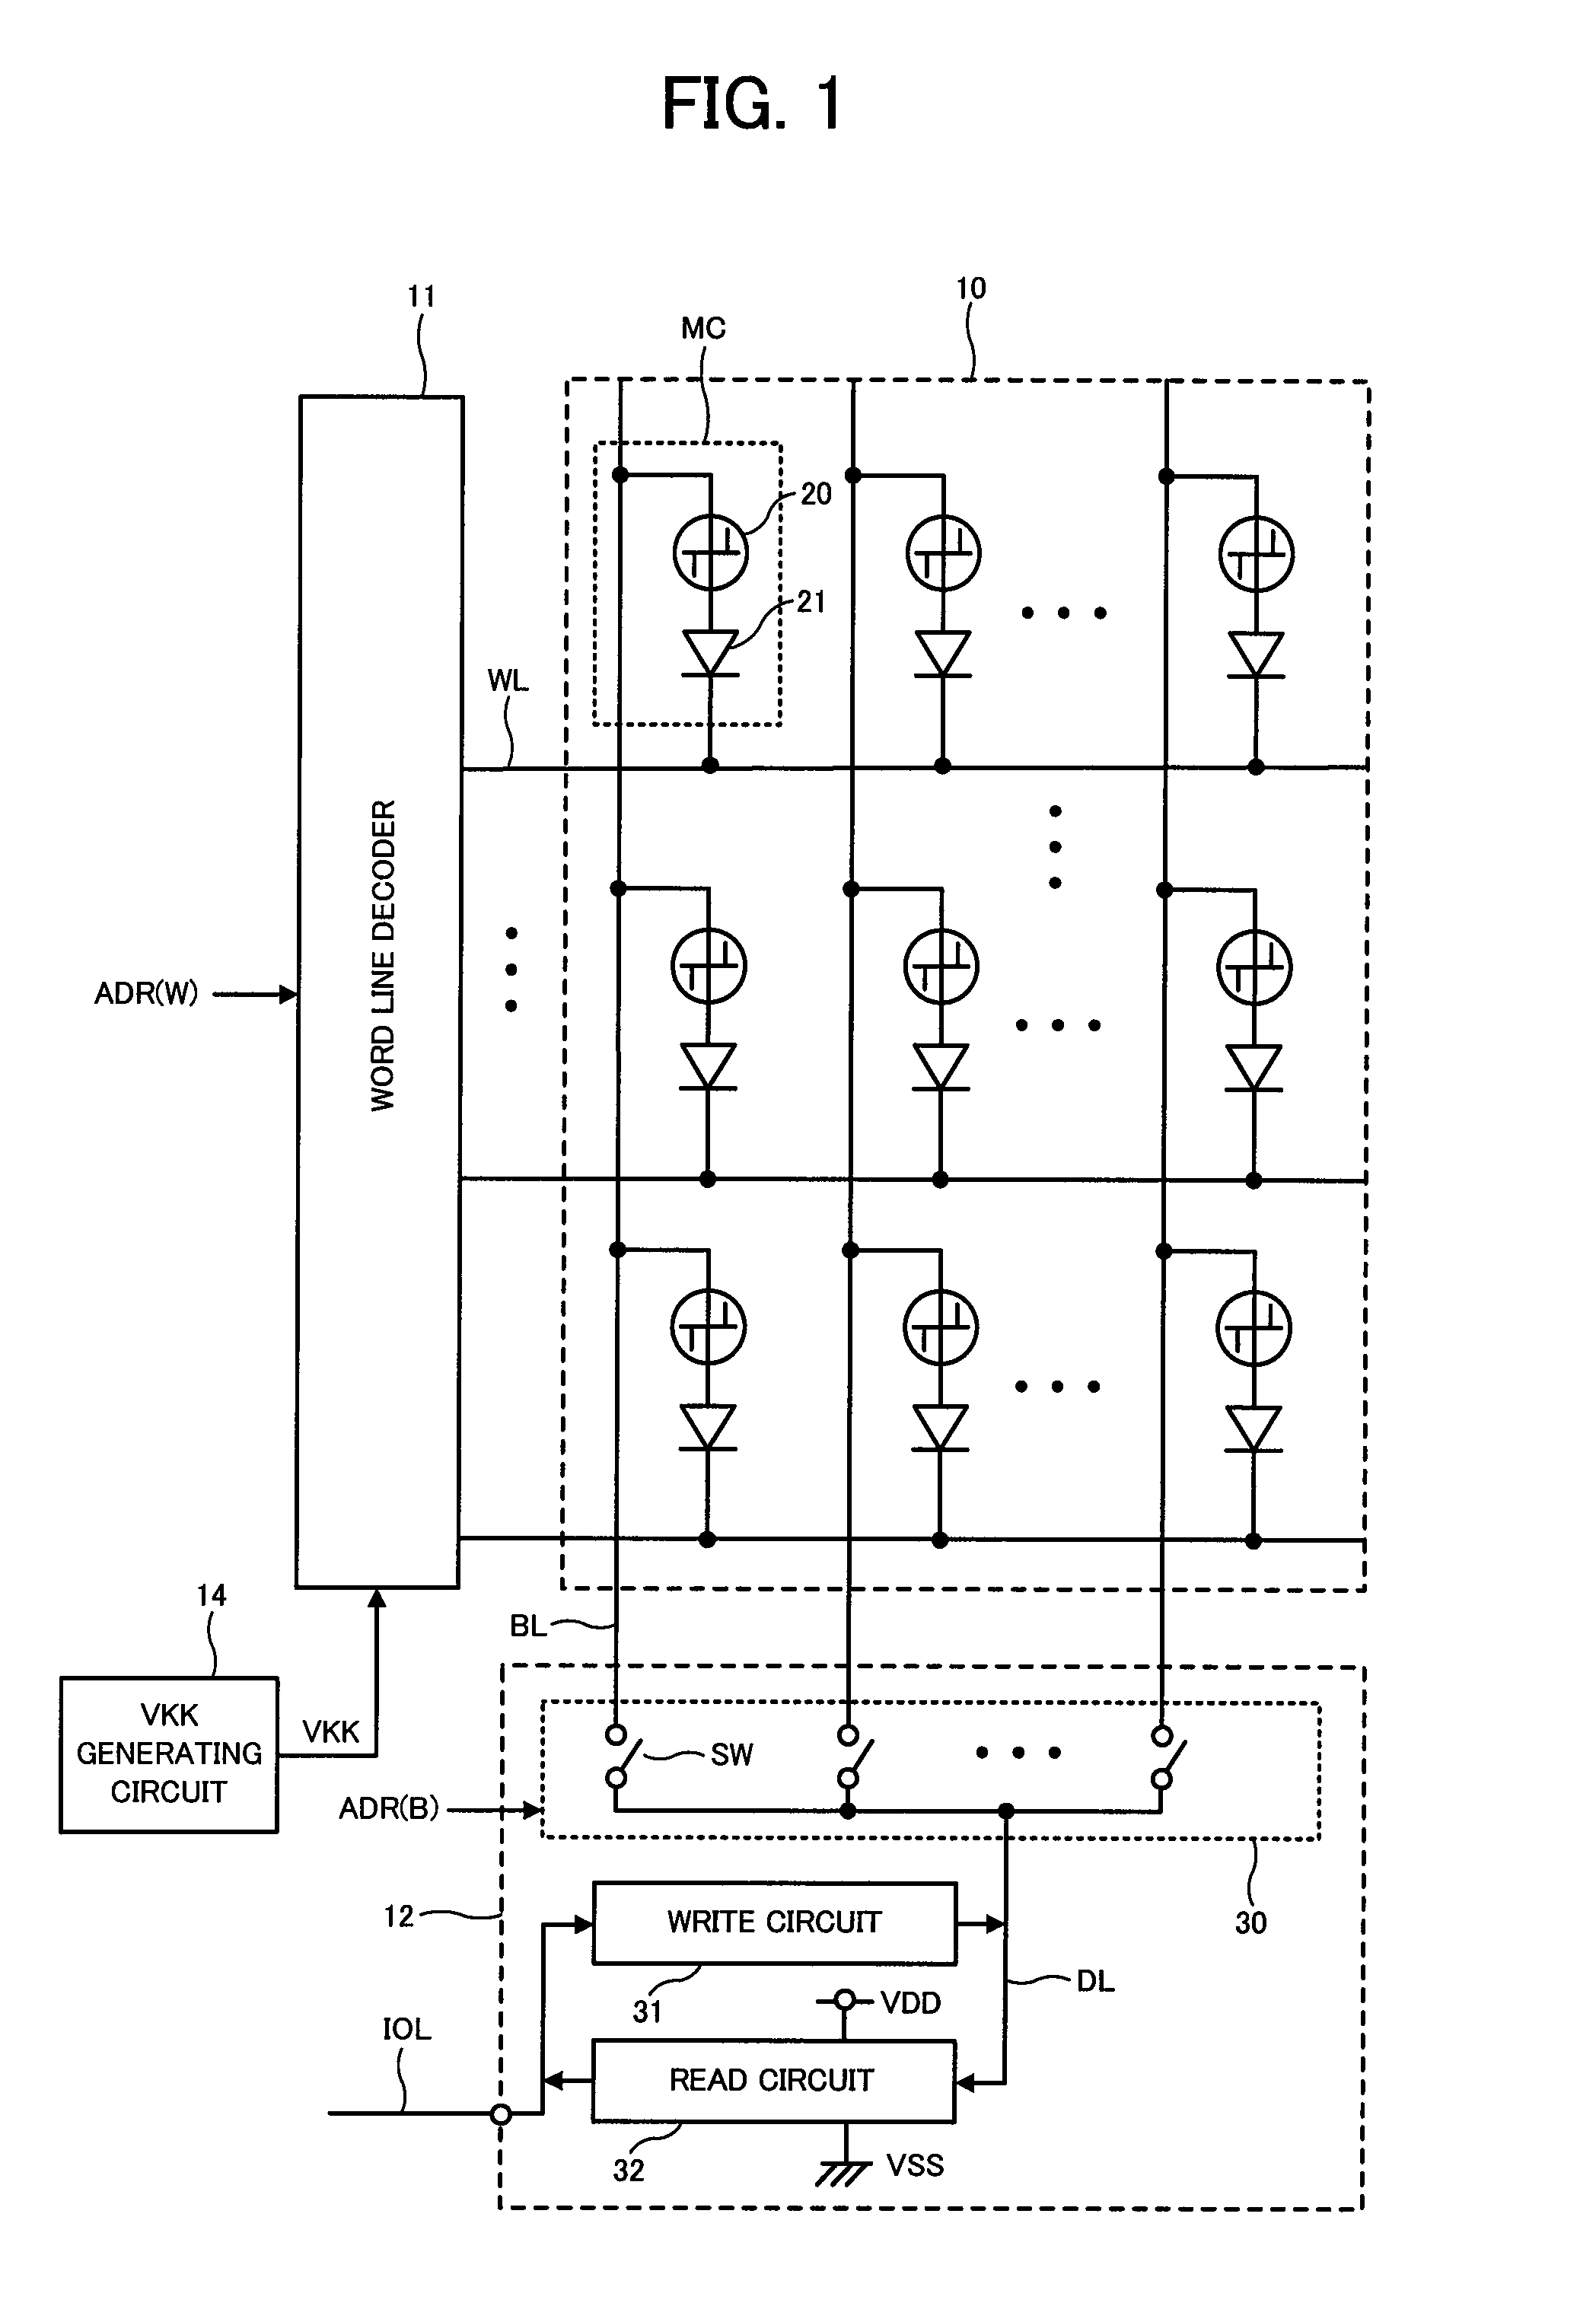 Semiconductor memory device having diode cell structure